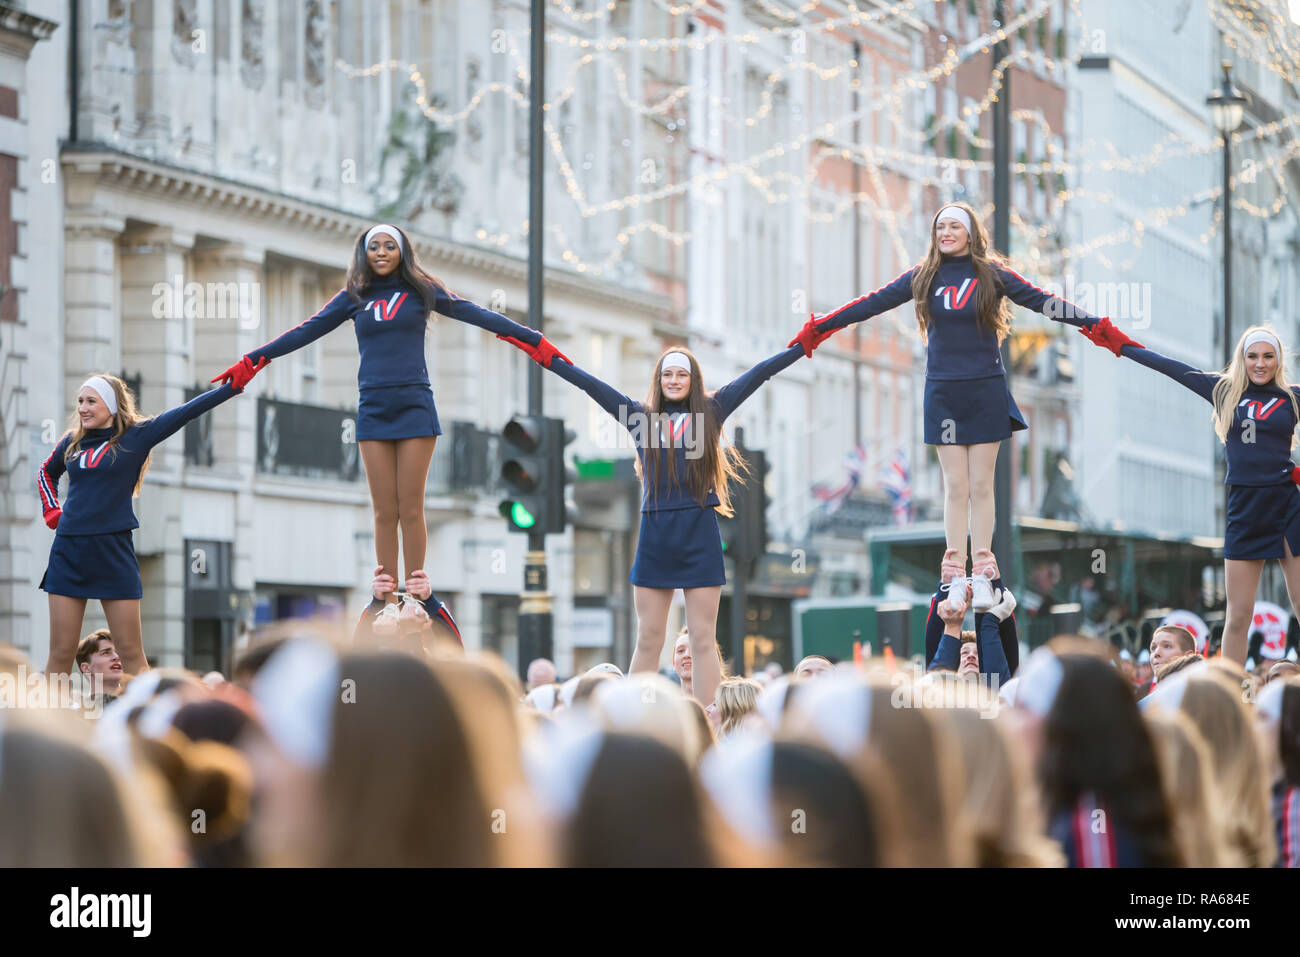 London, UK.  1 January 2019.  The theme of the parade this year was “London Welcomes the World”. With thousands of performers from a multitude of different countries and cultures from all around the world parade through central  London. Acts included the Varsity Spirit All-American Universal & National Cheerleaders Association.  Credit: Ilyas Ayub / Alamy Live News Stock Photo